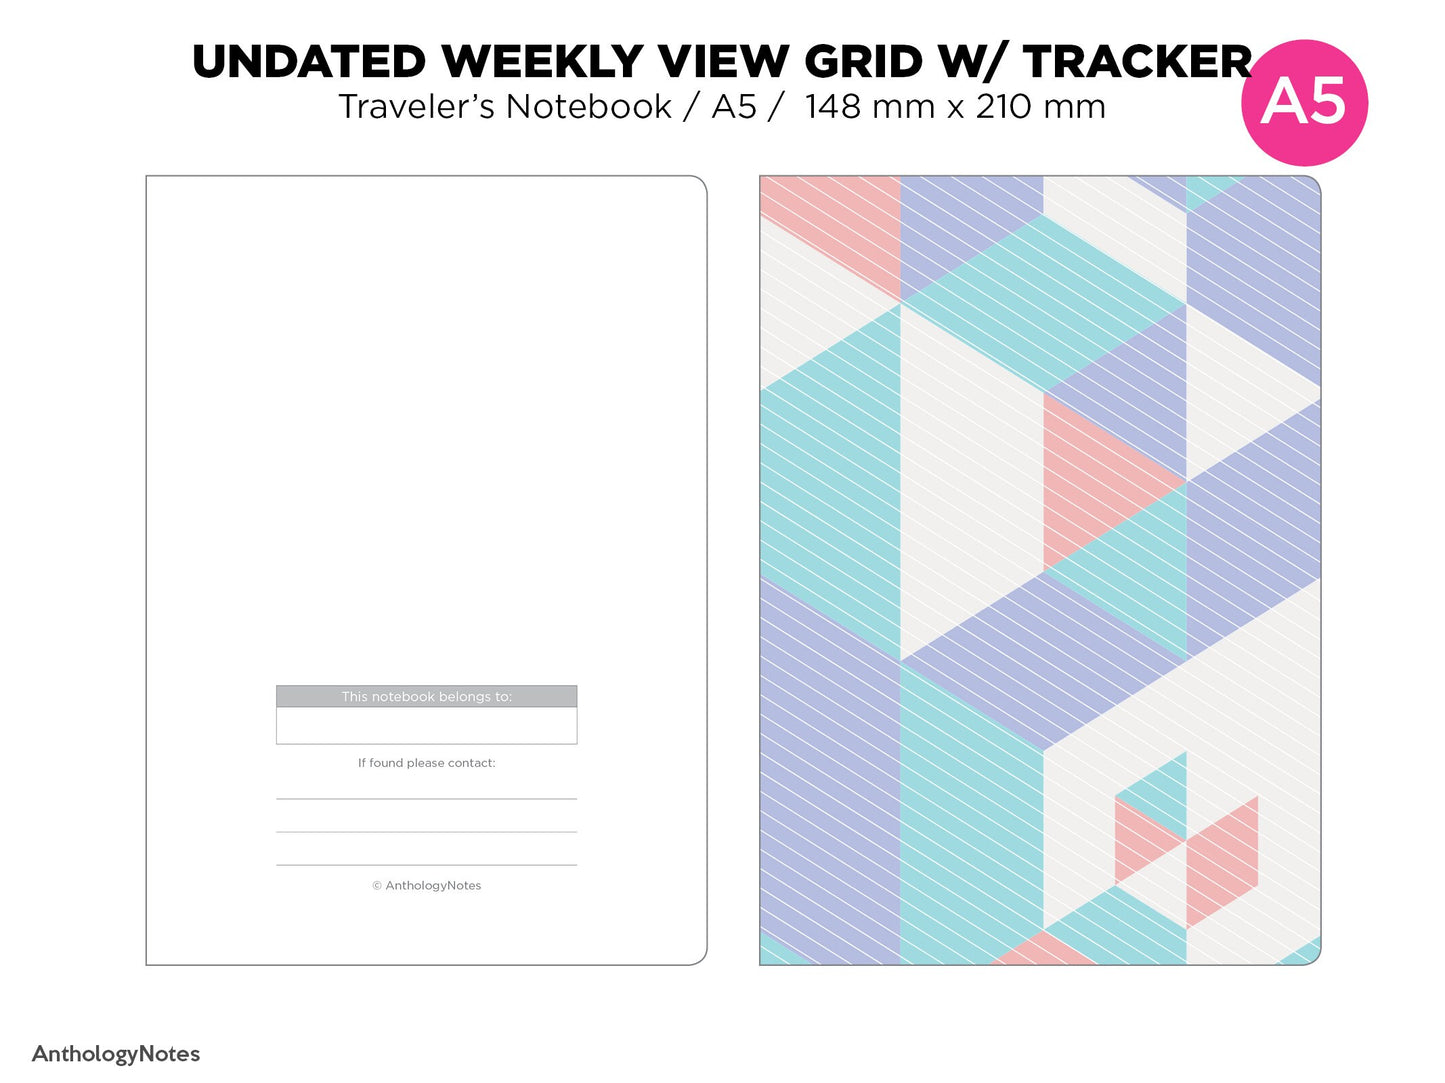 A5 WEEKLY View Vertical GRID with TRACKER undated Printable Insert Traveler's Notebook A5025